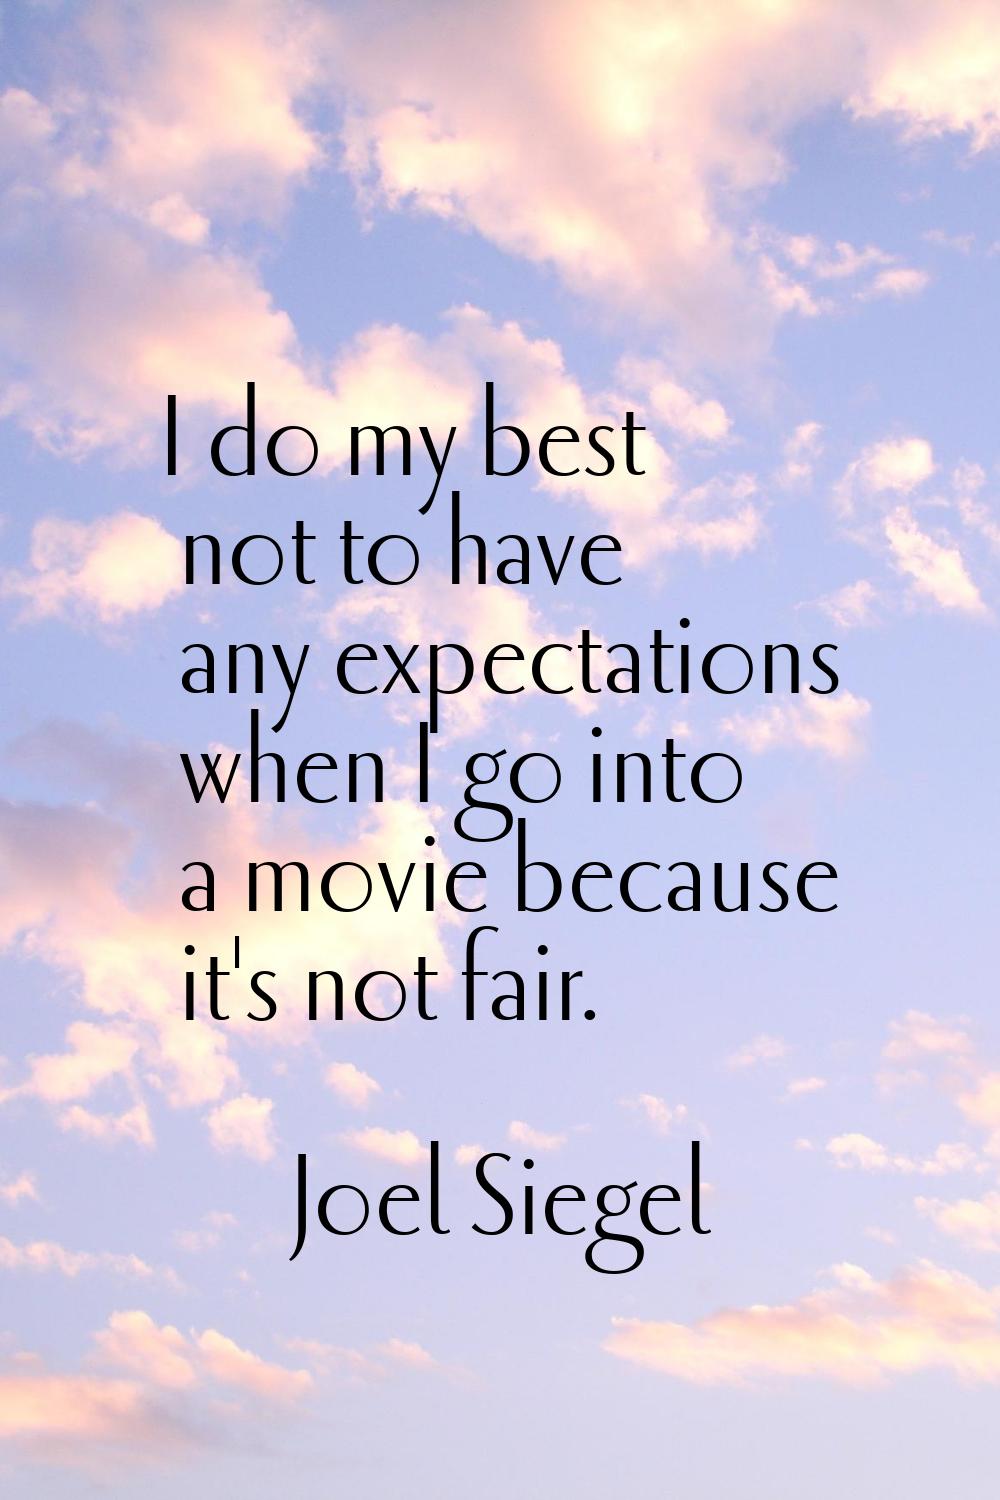 I do my best not to have any expectations when I go into a movie because it's not fair.